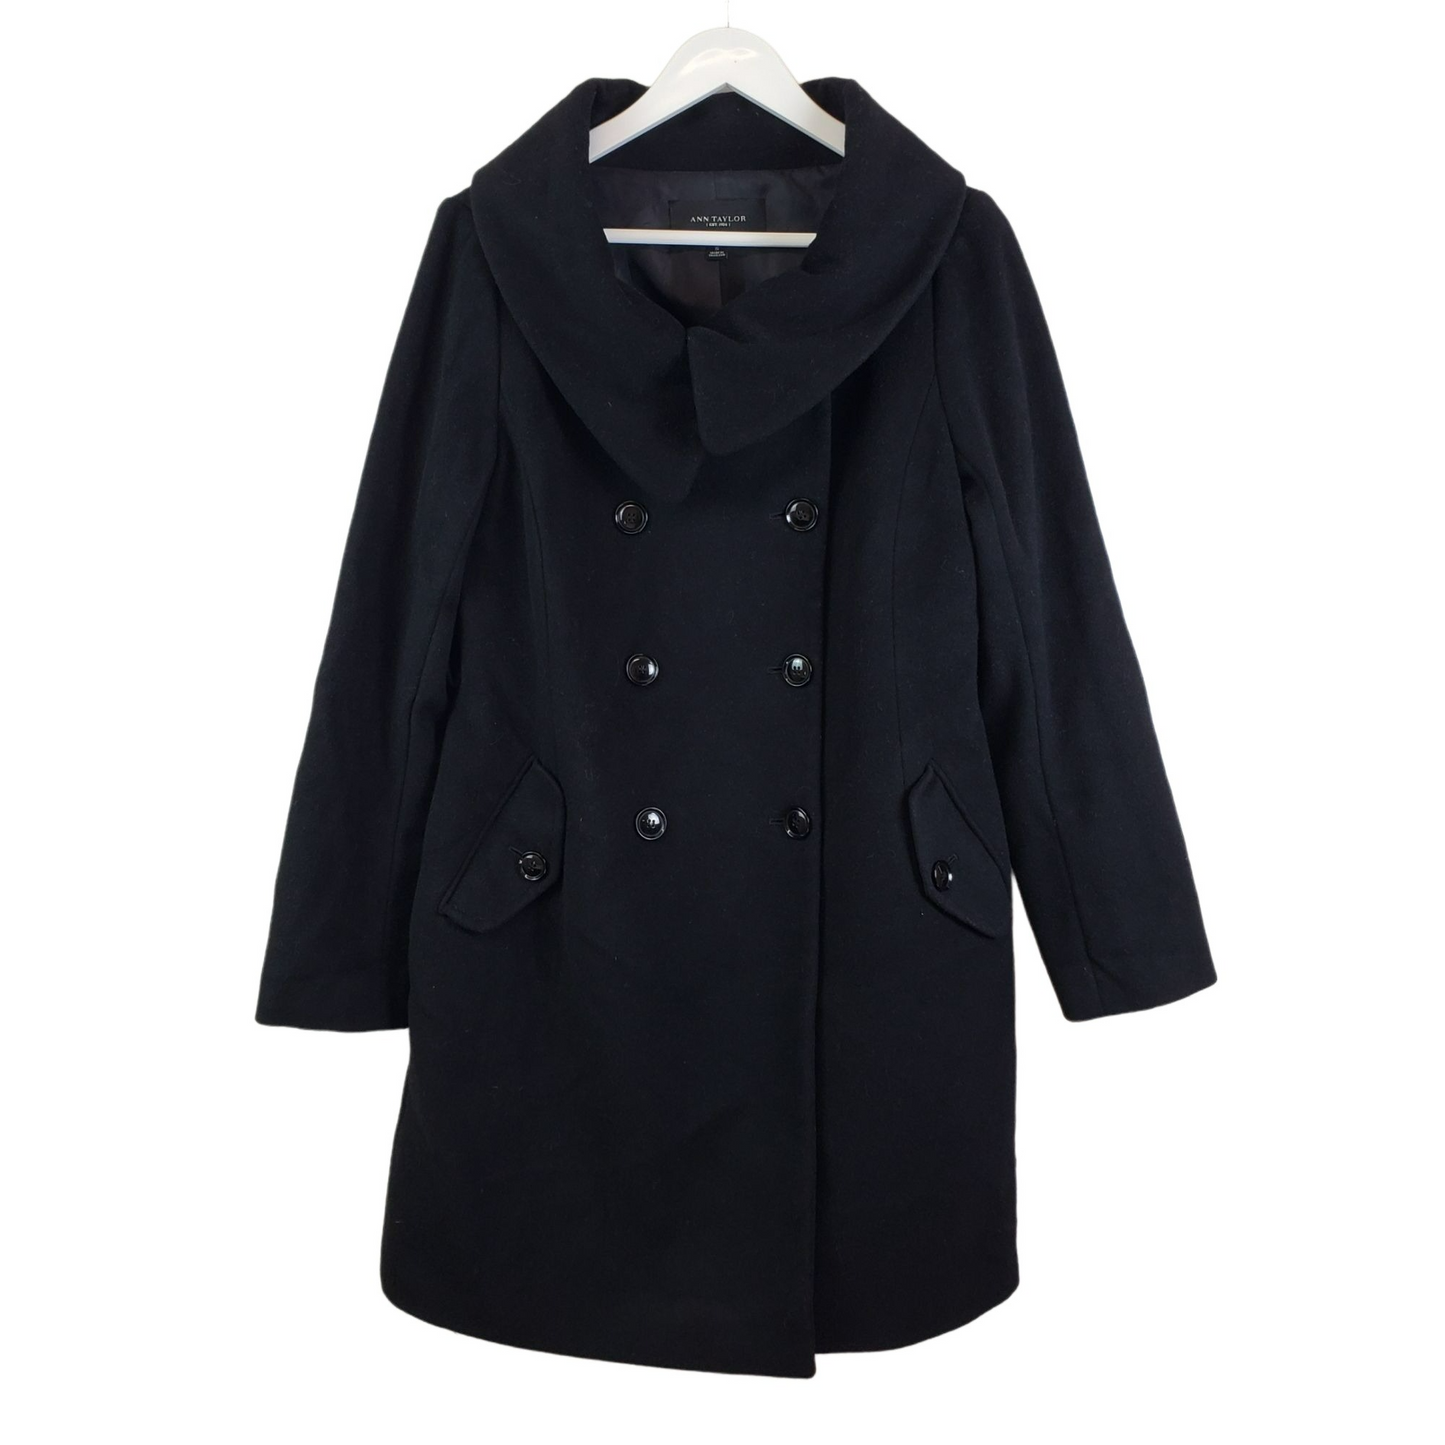 Ann Taylor Wool Blend Peacoat Size Small *Missing Belt*